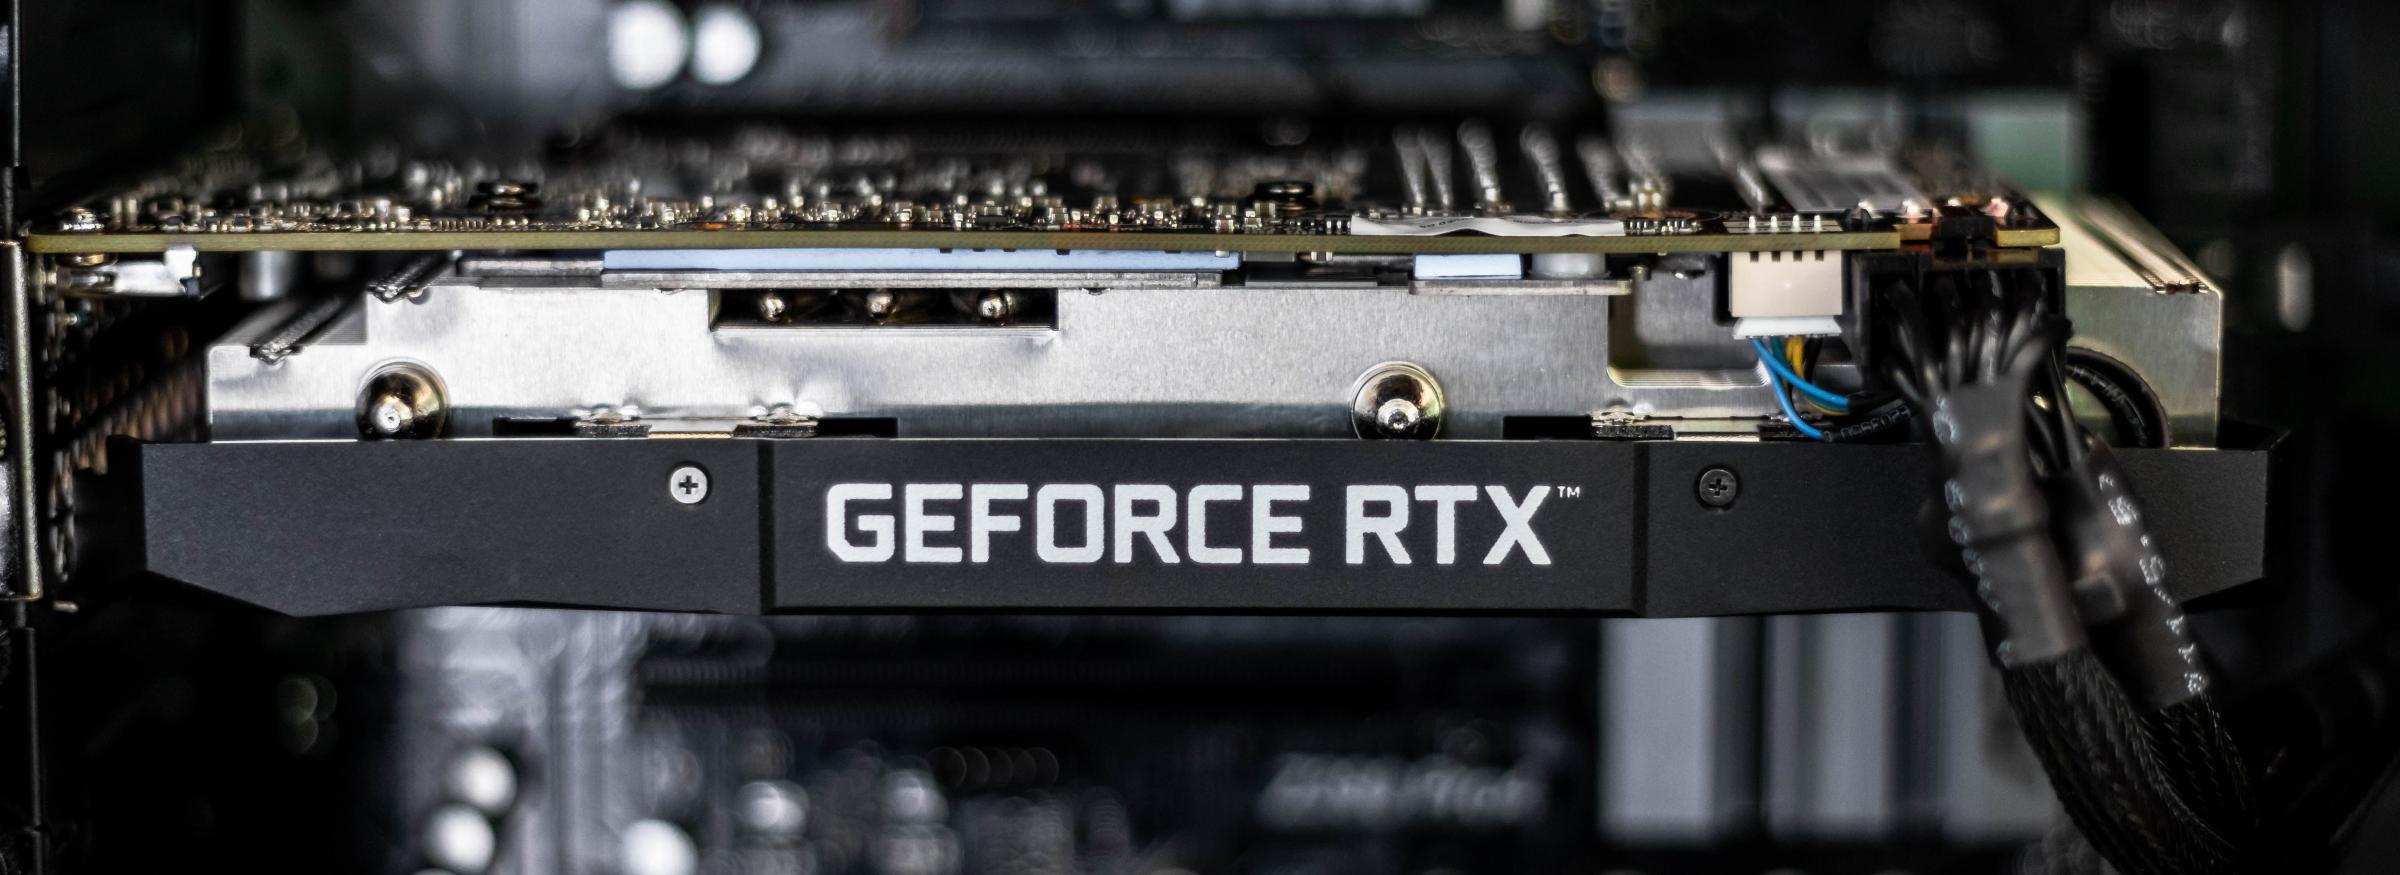 The next increase in prices for video cards is expected after the Chinese New Year